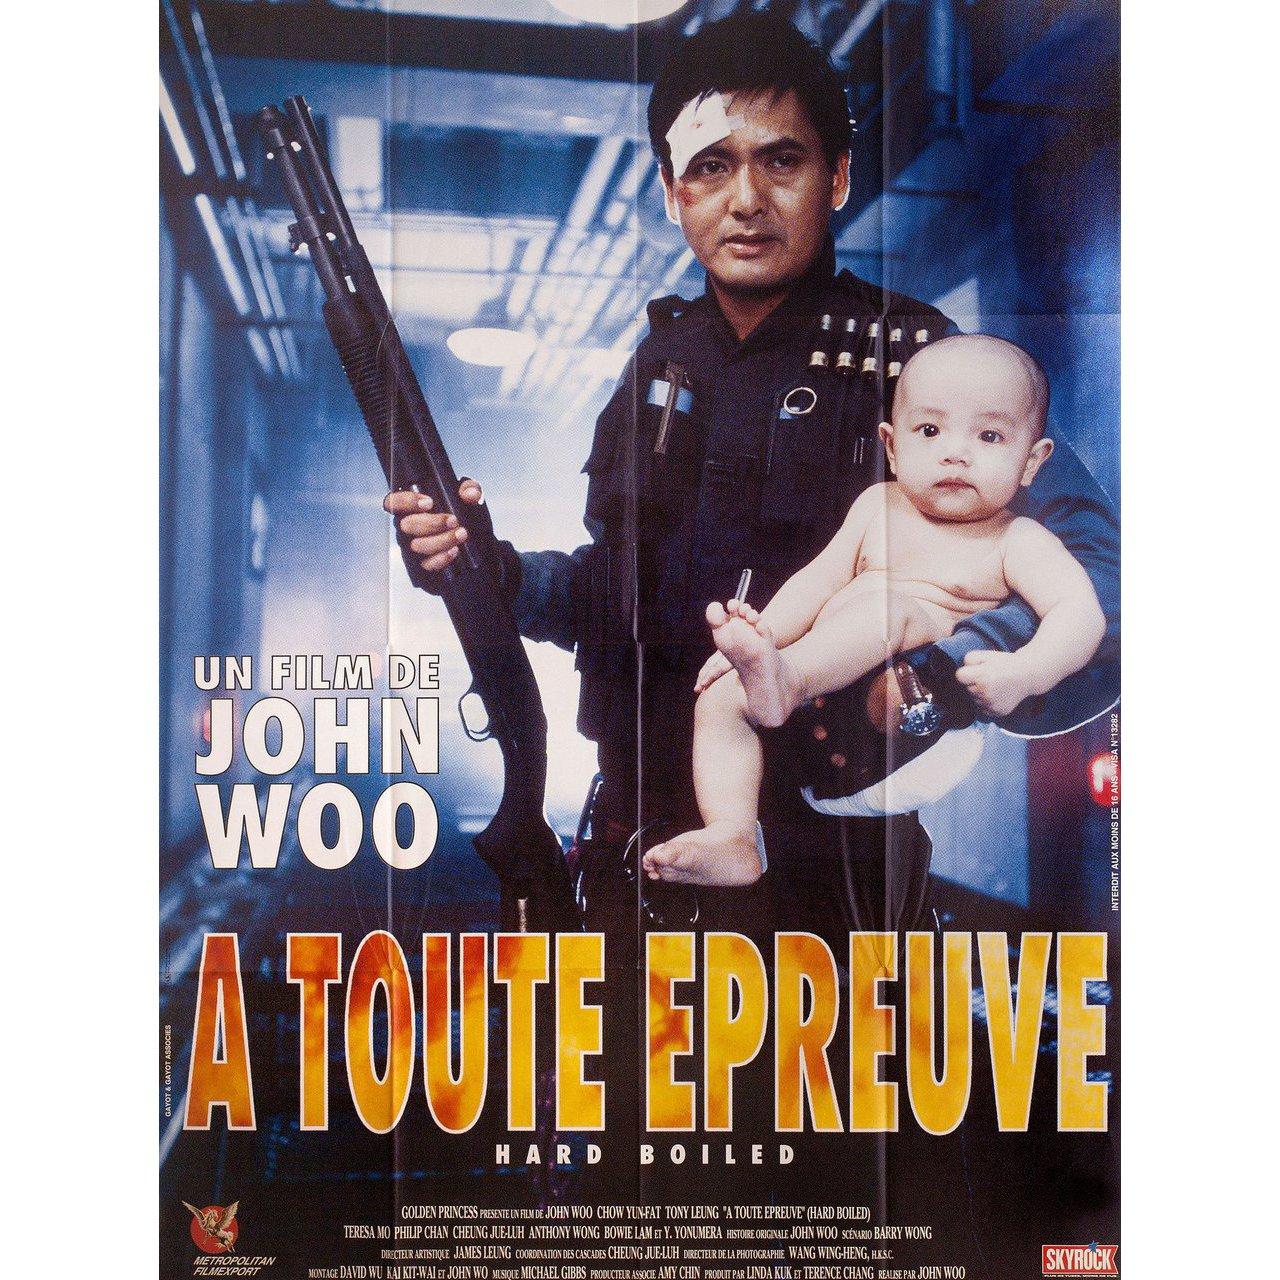 Original 1992 French Grande poster for the film “Hard Boiled” directed by John Woo with Yun-Fat Chow / Tony Chiu Wai Leung / Teresa Mo / Philip Chan. Fine condition, folded. Many original posters were issued folded or were subsequently folded.